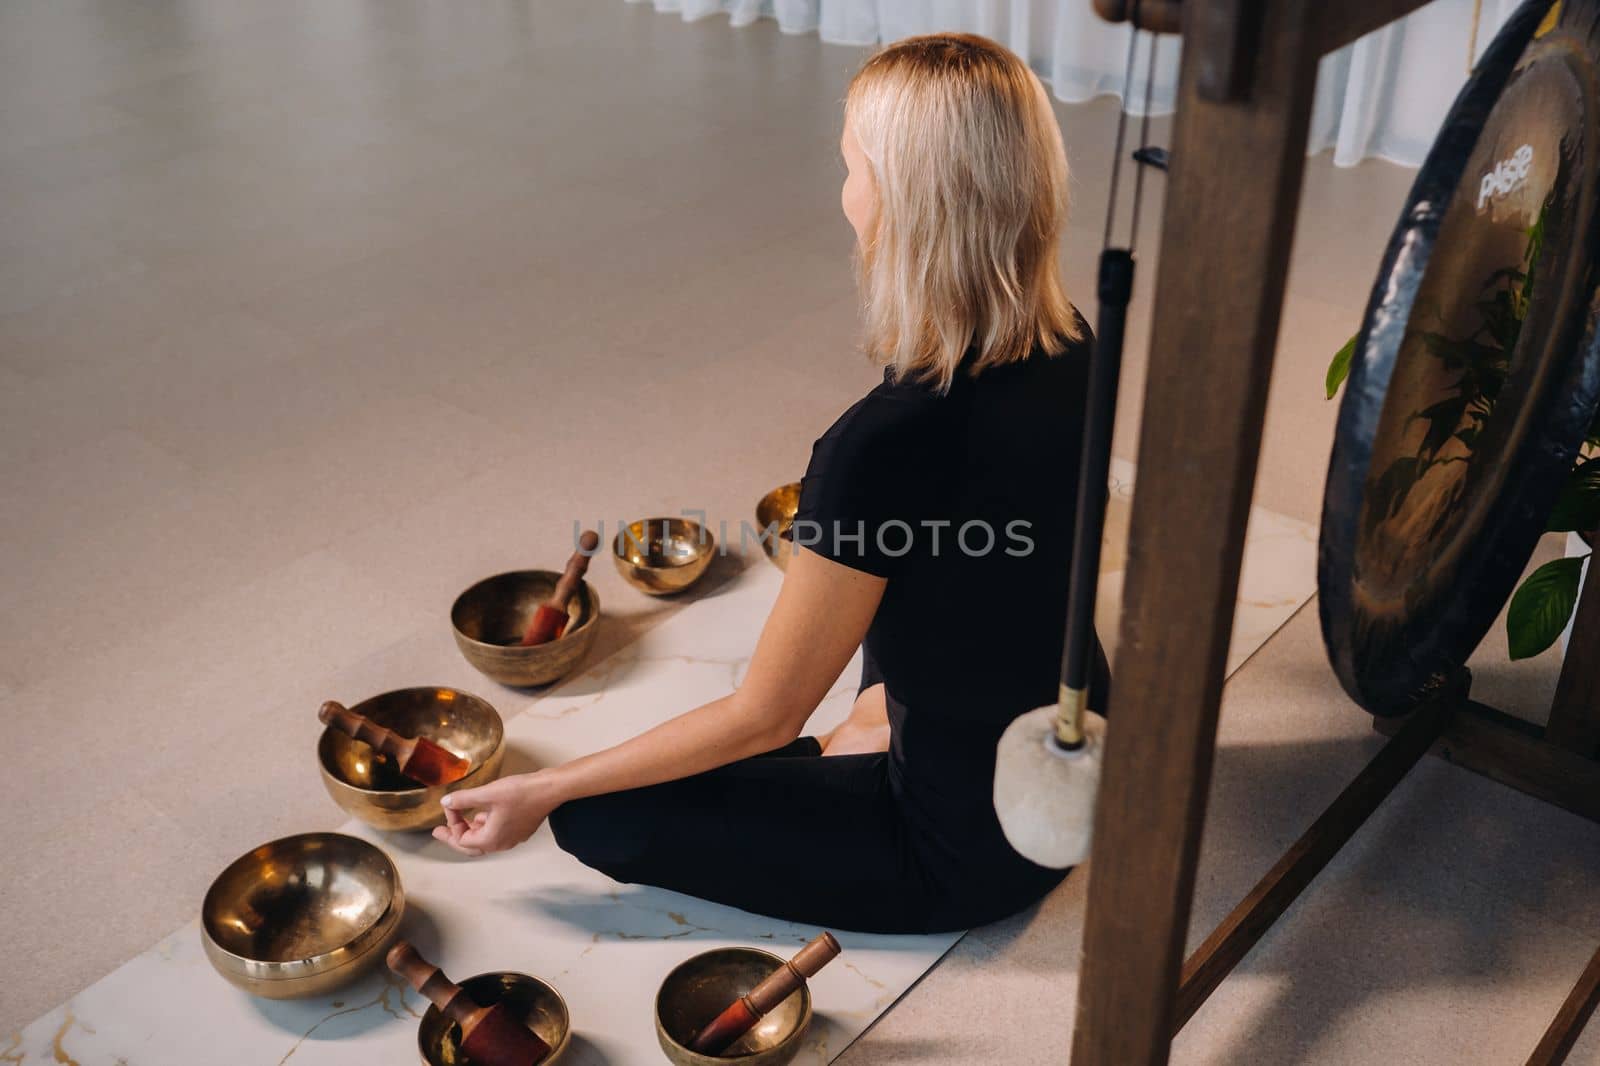 A woman sits in a lotus position next to Tibetan bowls, sitting on a yoga mat against the background of a gong by Lobachad